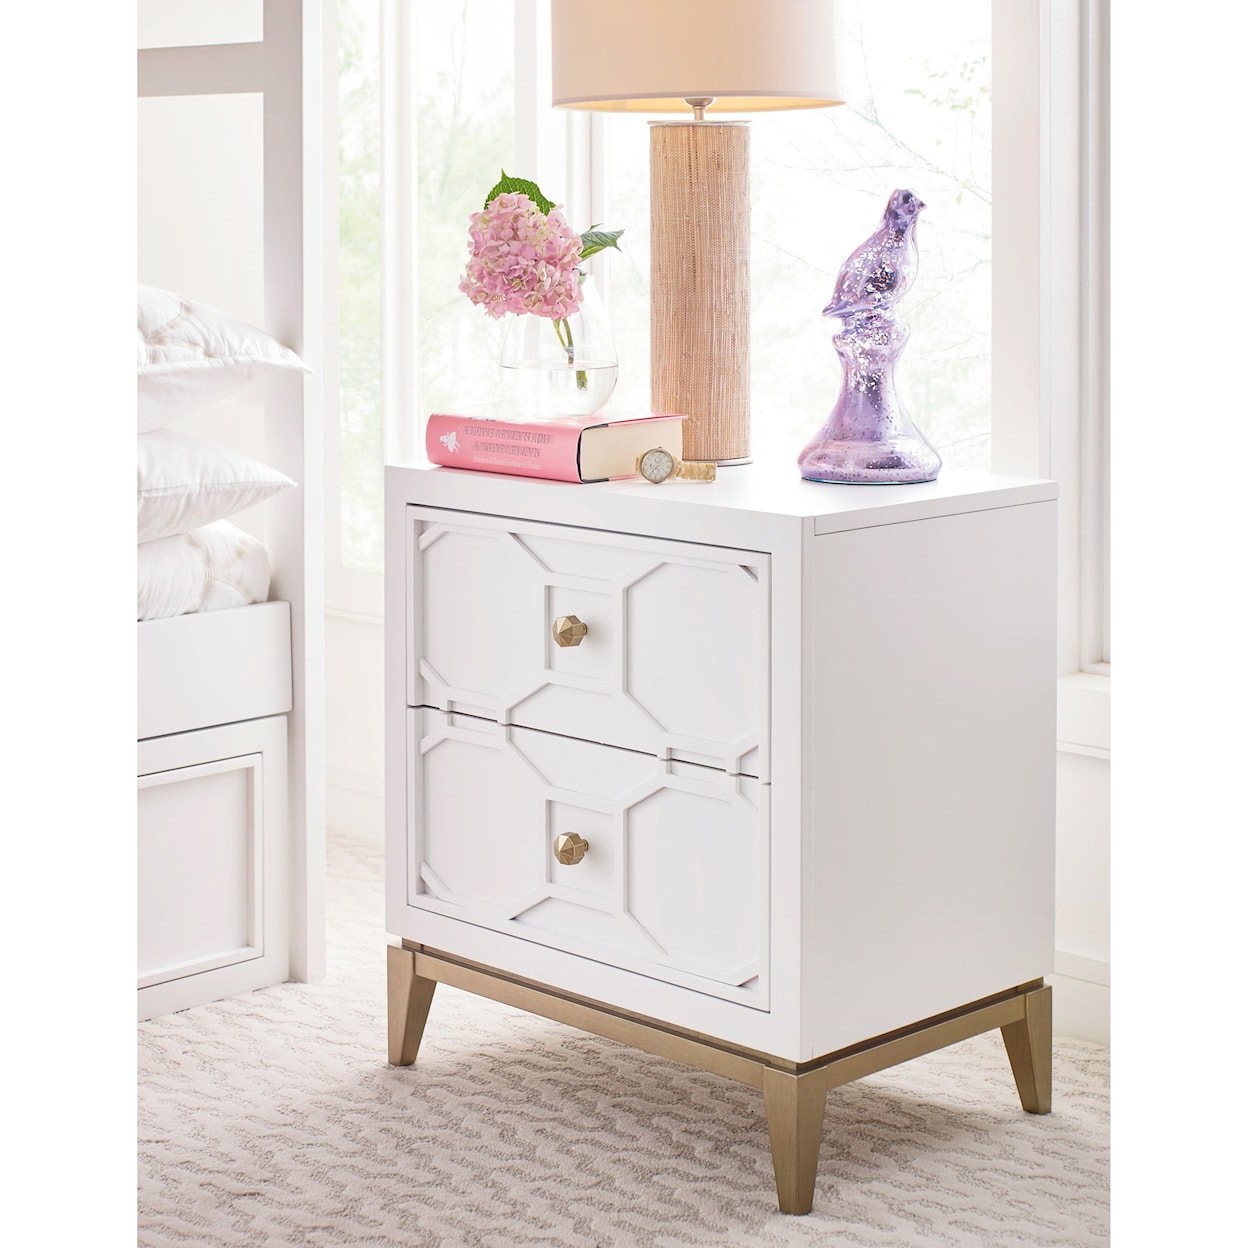 Rachael Ray Home Chelsea Youth Night Stand with Decorative Lattice